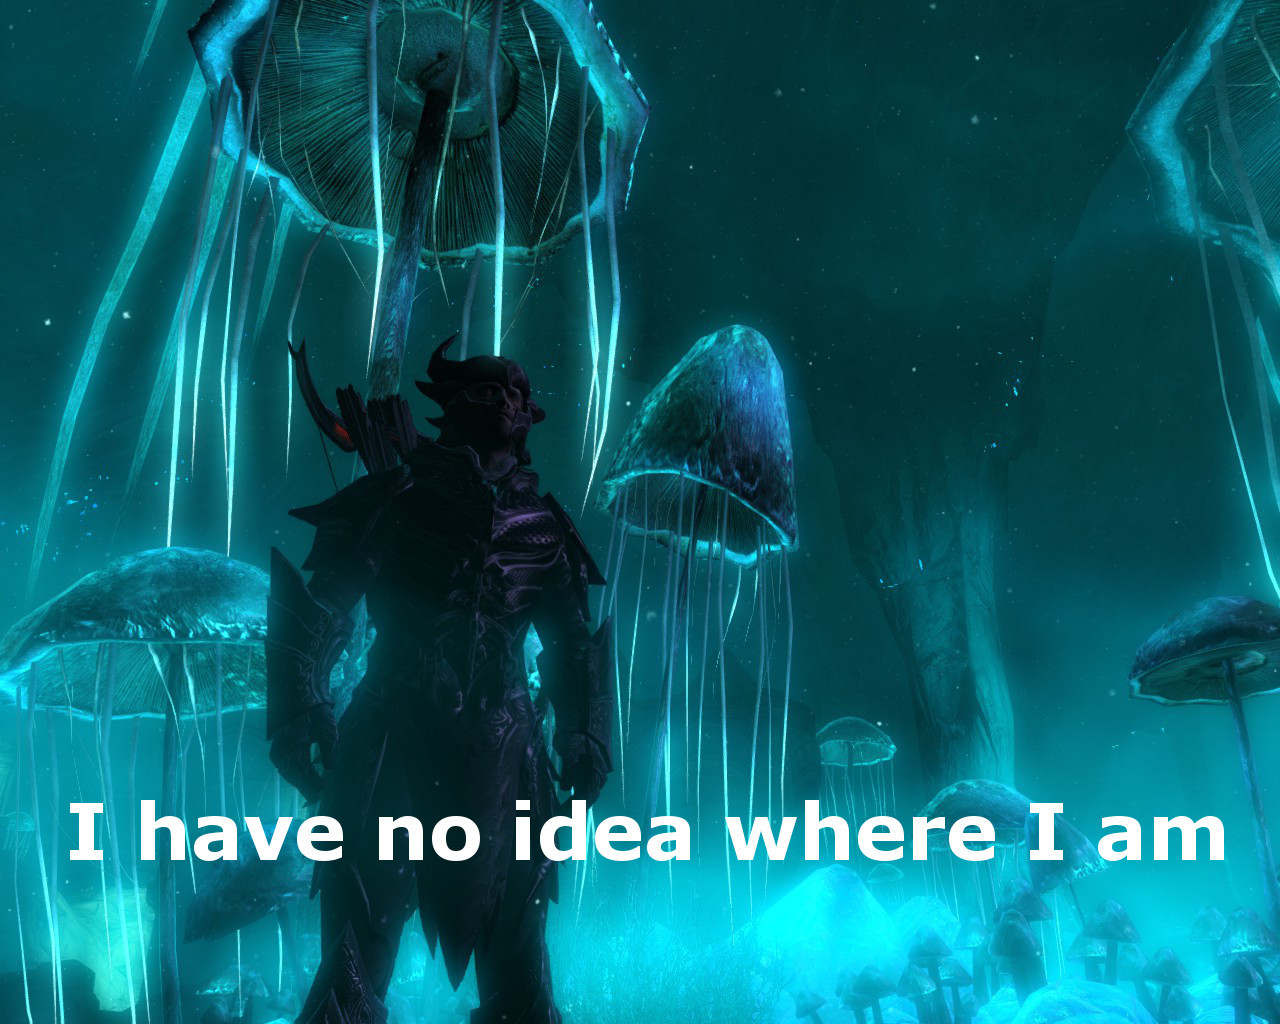 When you take shrooms and thought it was skooma and you thought you were in cyrodiil but youre in blackreach - meme